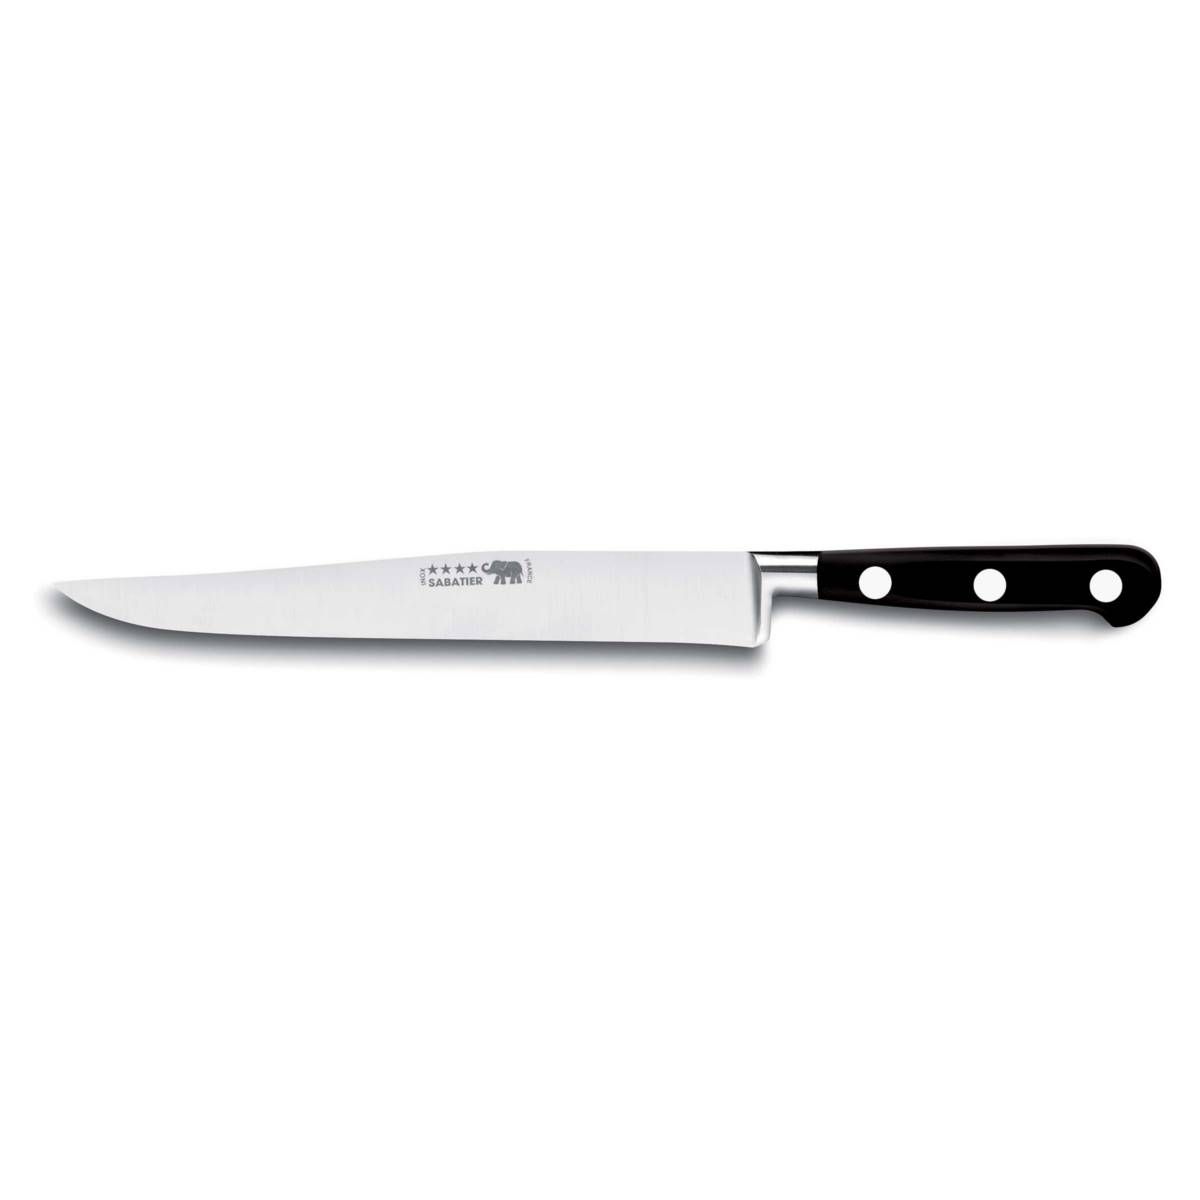 https://www.thiers-issard.fr/6874-product_zoom/carving-knife.jpg